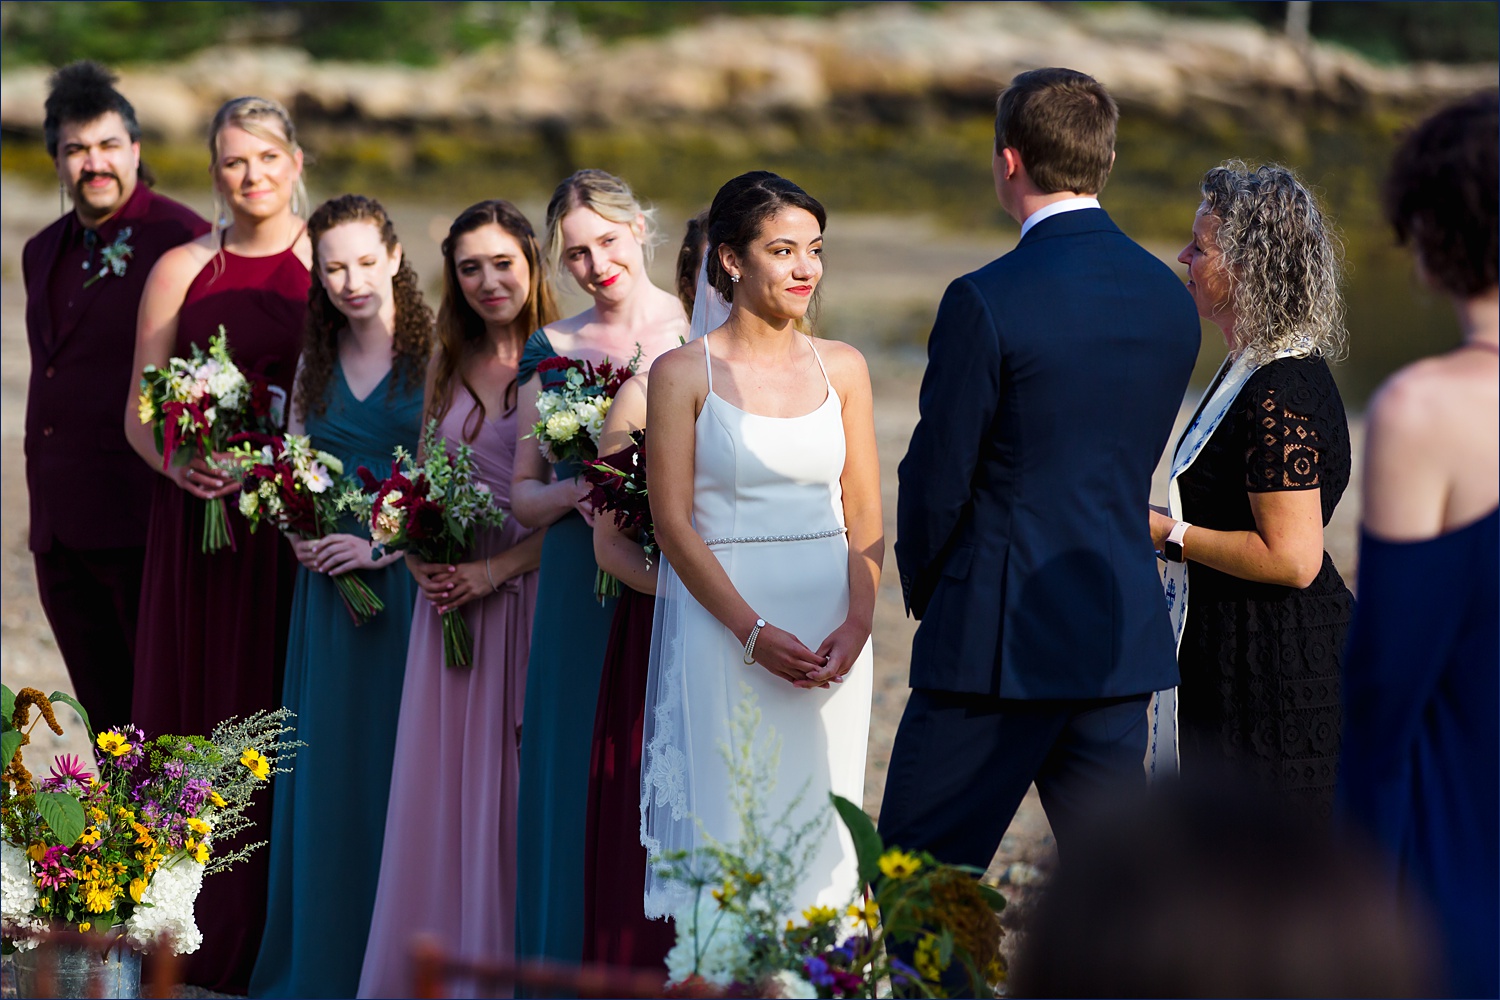 The bride and her side of the wedding party on the Maine wedding day